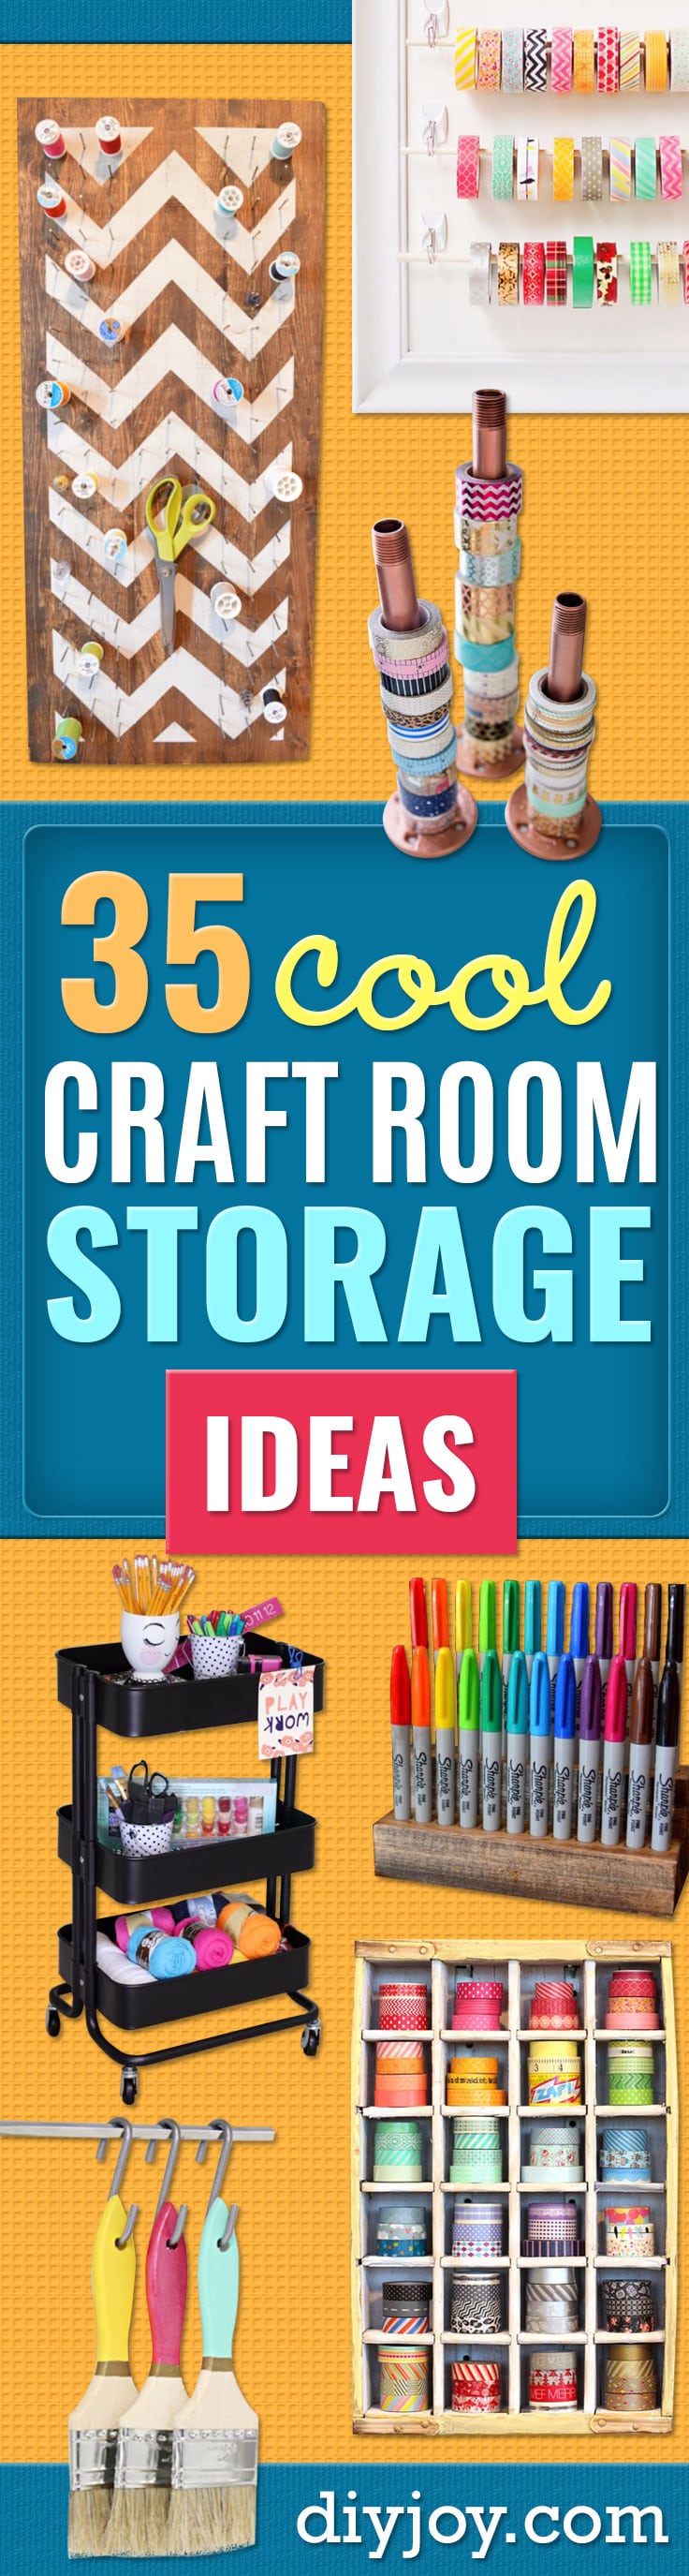 DIY Craft Room Storage Ideas and Craft Room Organization Projects - Cool Ideas for Do It Yourself Craft Storage, Craft Room Decor and Organizing Project Ideas - fabric, paper, pens, creative tools, crafts supplies, shelves and sewing notions 